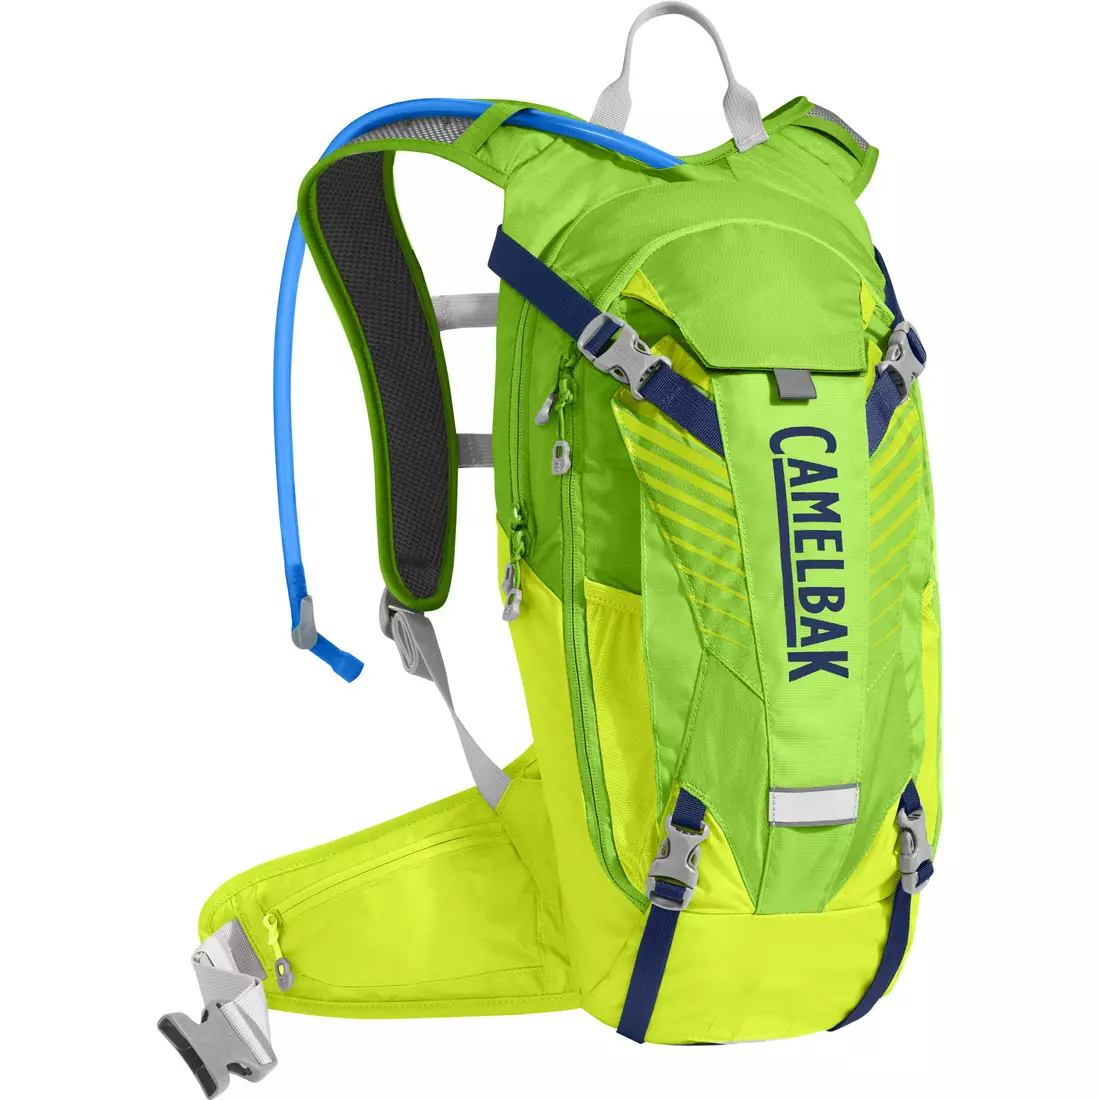 Camelbak SS18 bicycle backpack K.U.D.U. 8 DRY Limeade//Lime Punch 1359301900